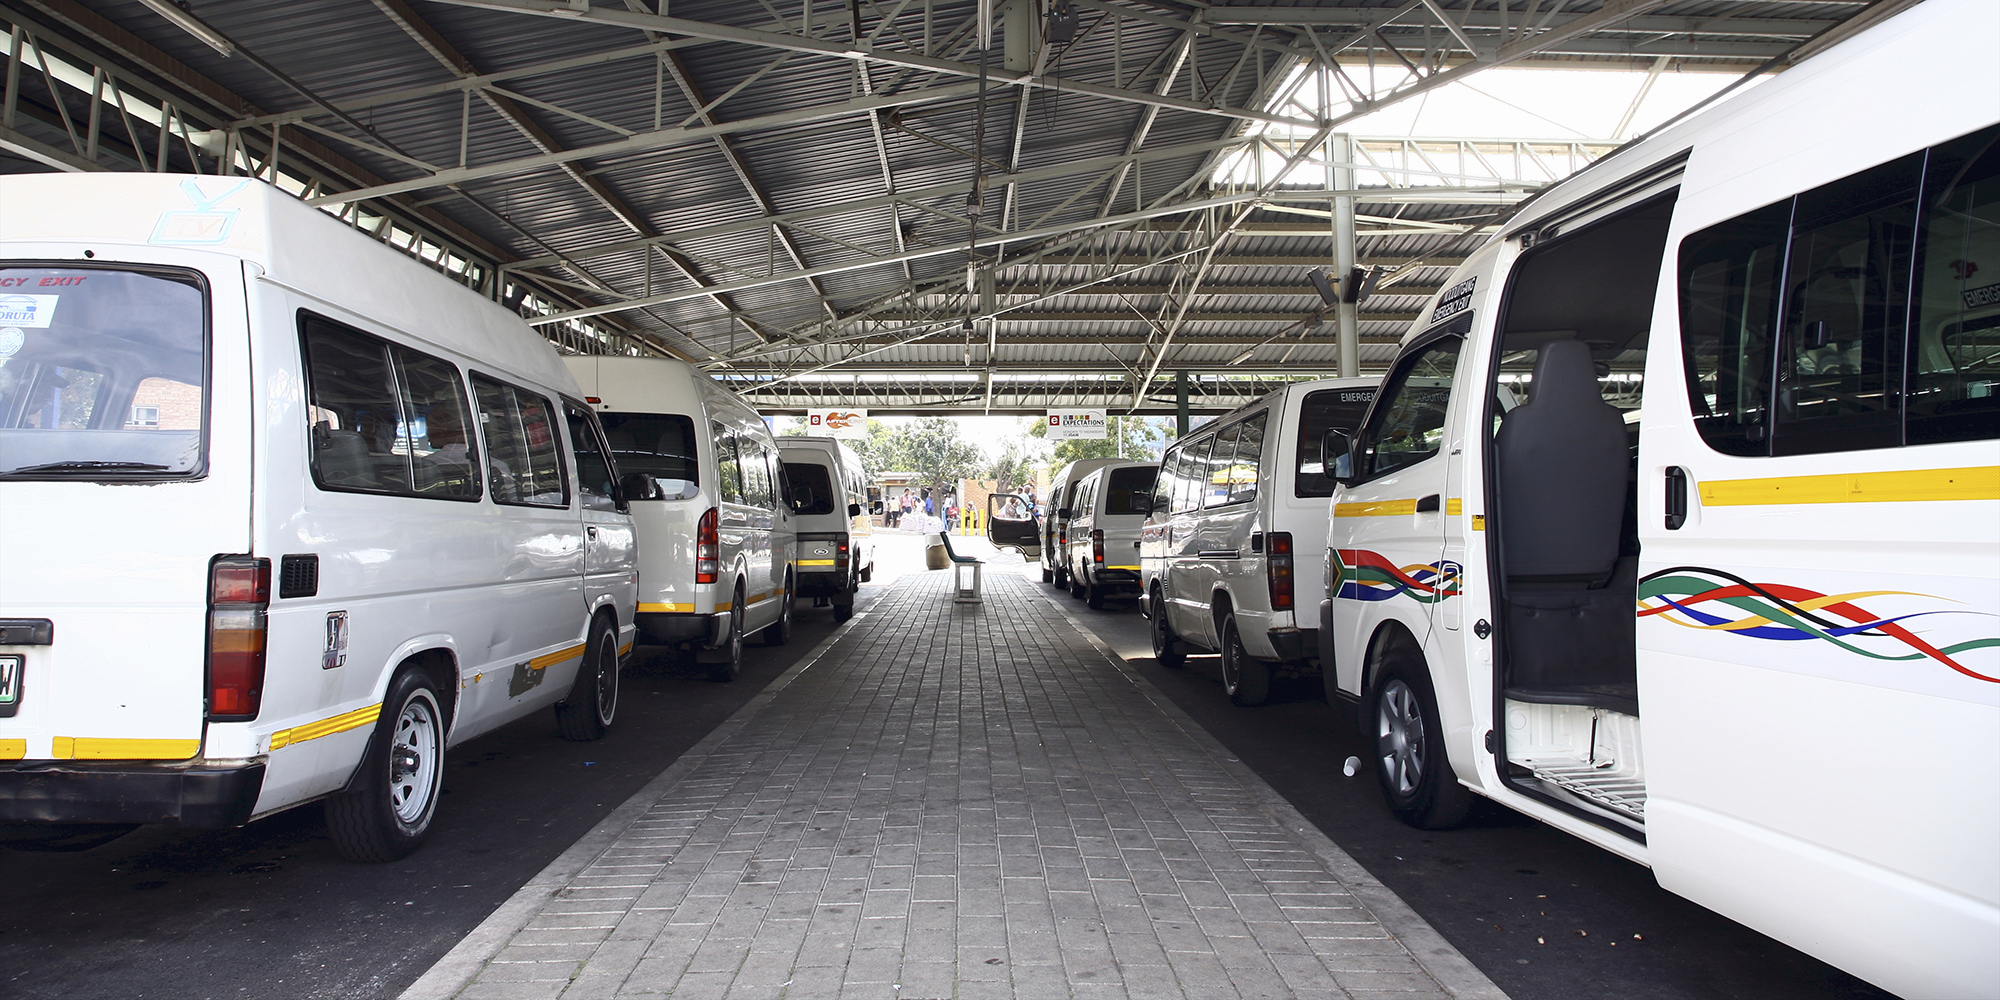 The Commission of Inquiry into Taxi Violence continues on 13 October 2020